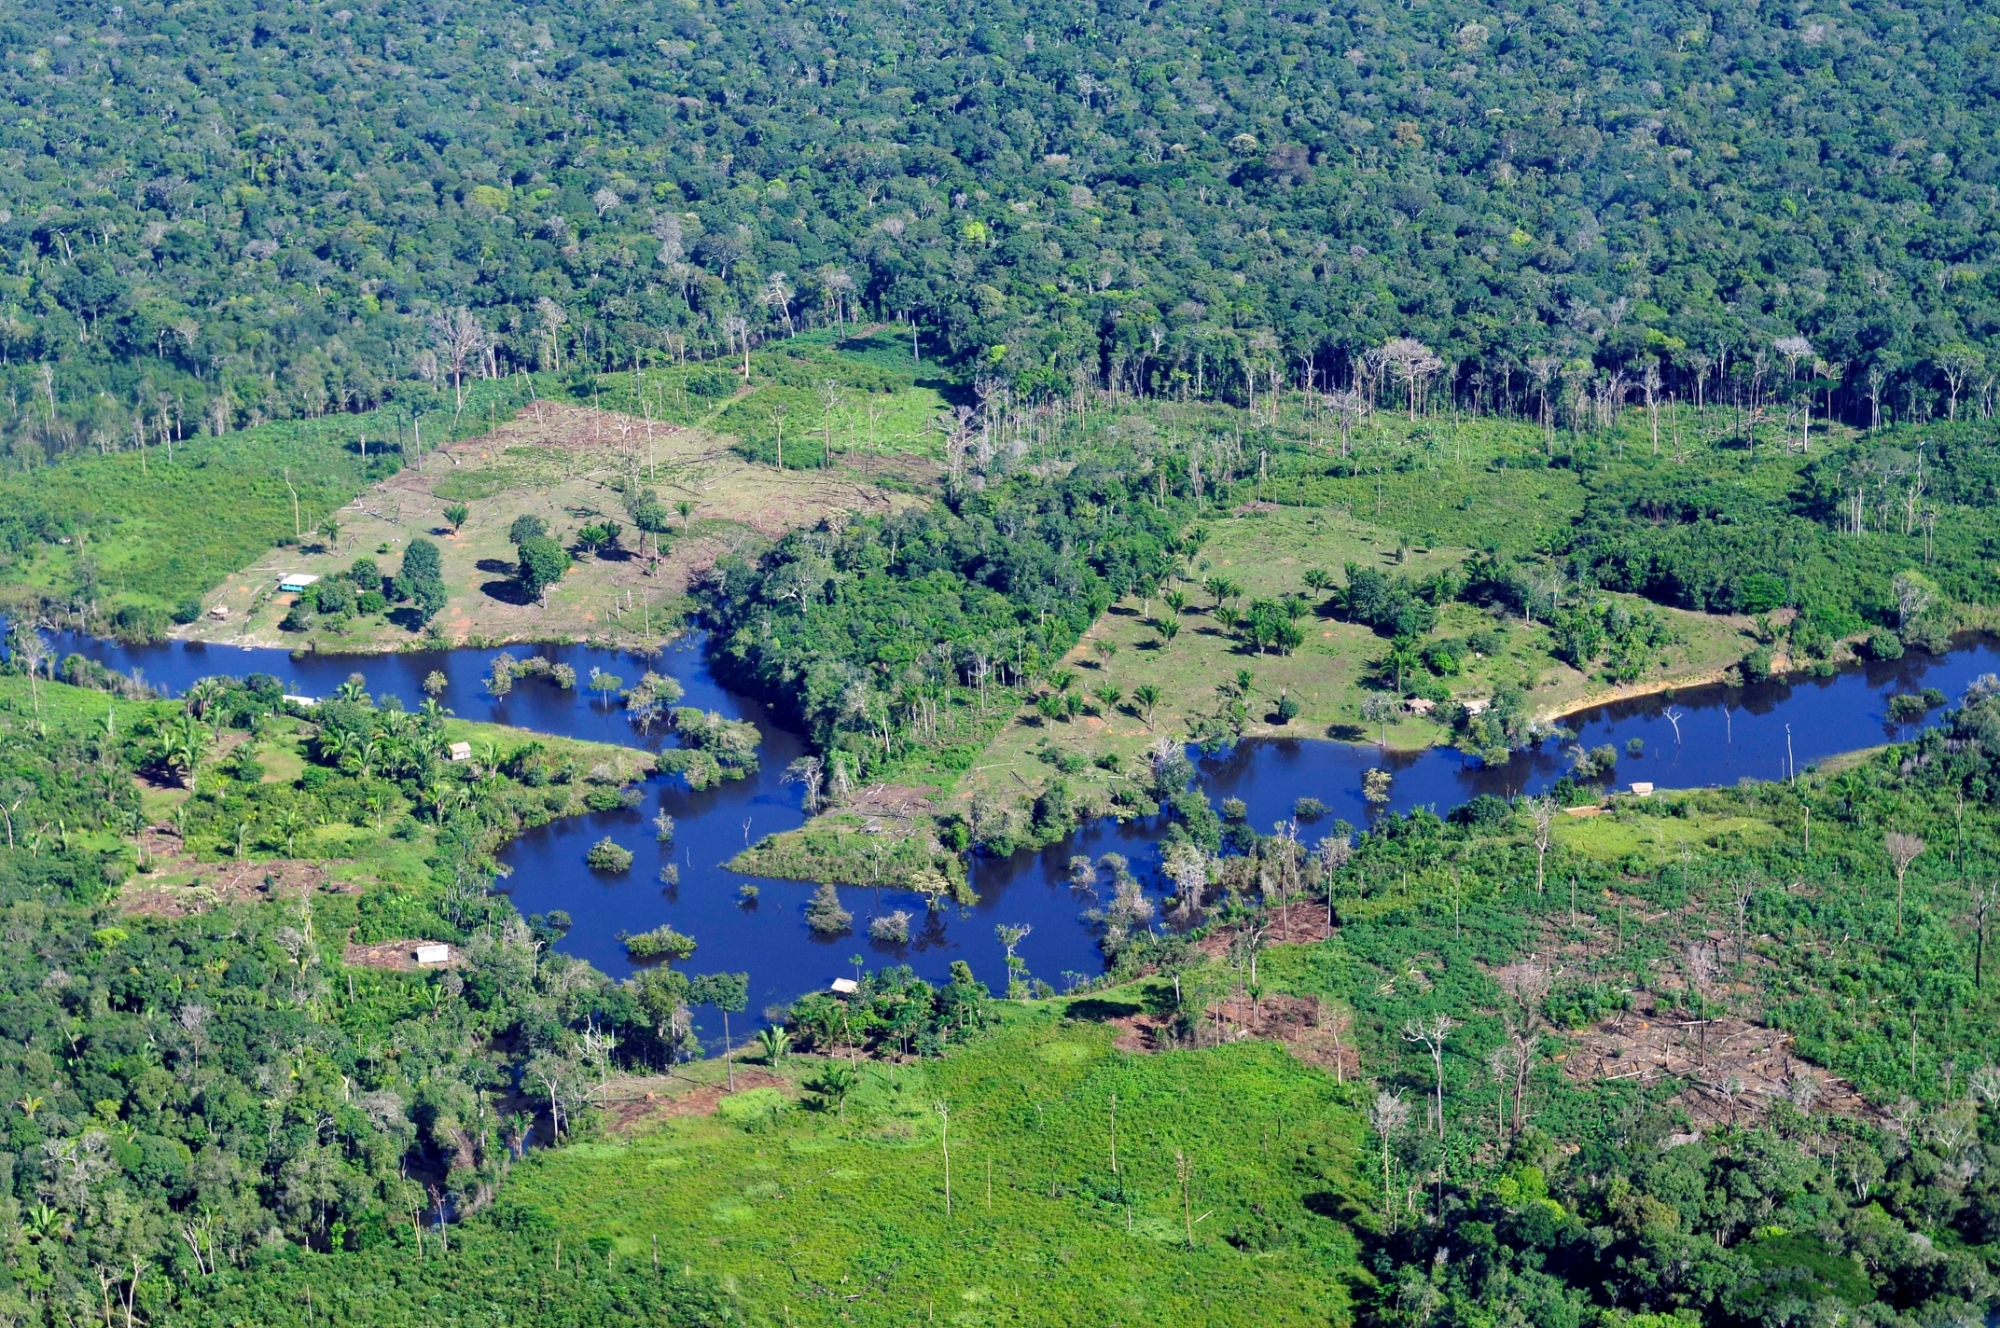 Aerial view of the Amazon Rainforest, near Manaus, the capital of the Brazilian state of Amazonas.